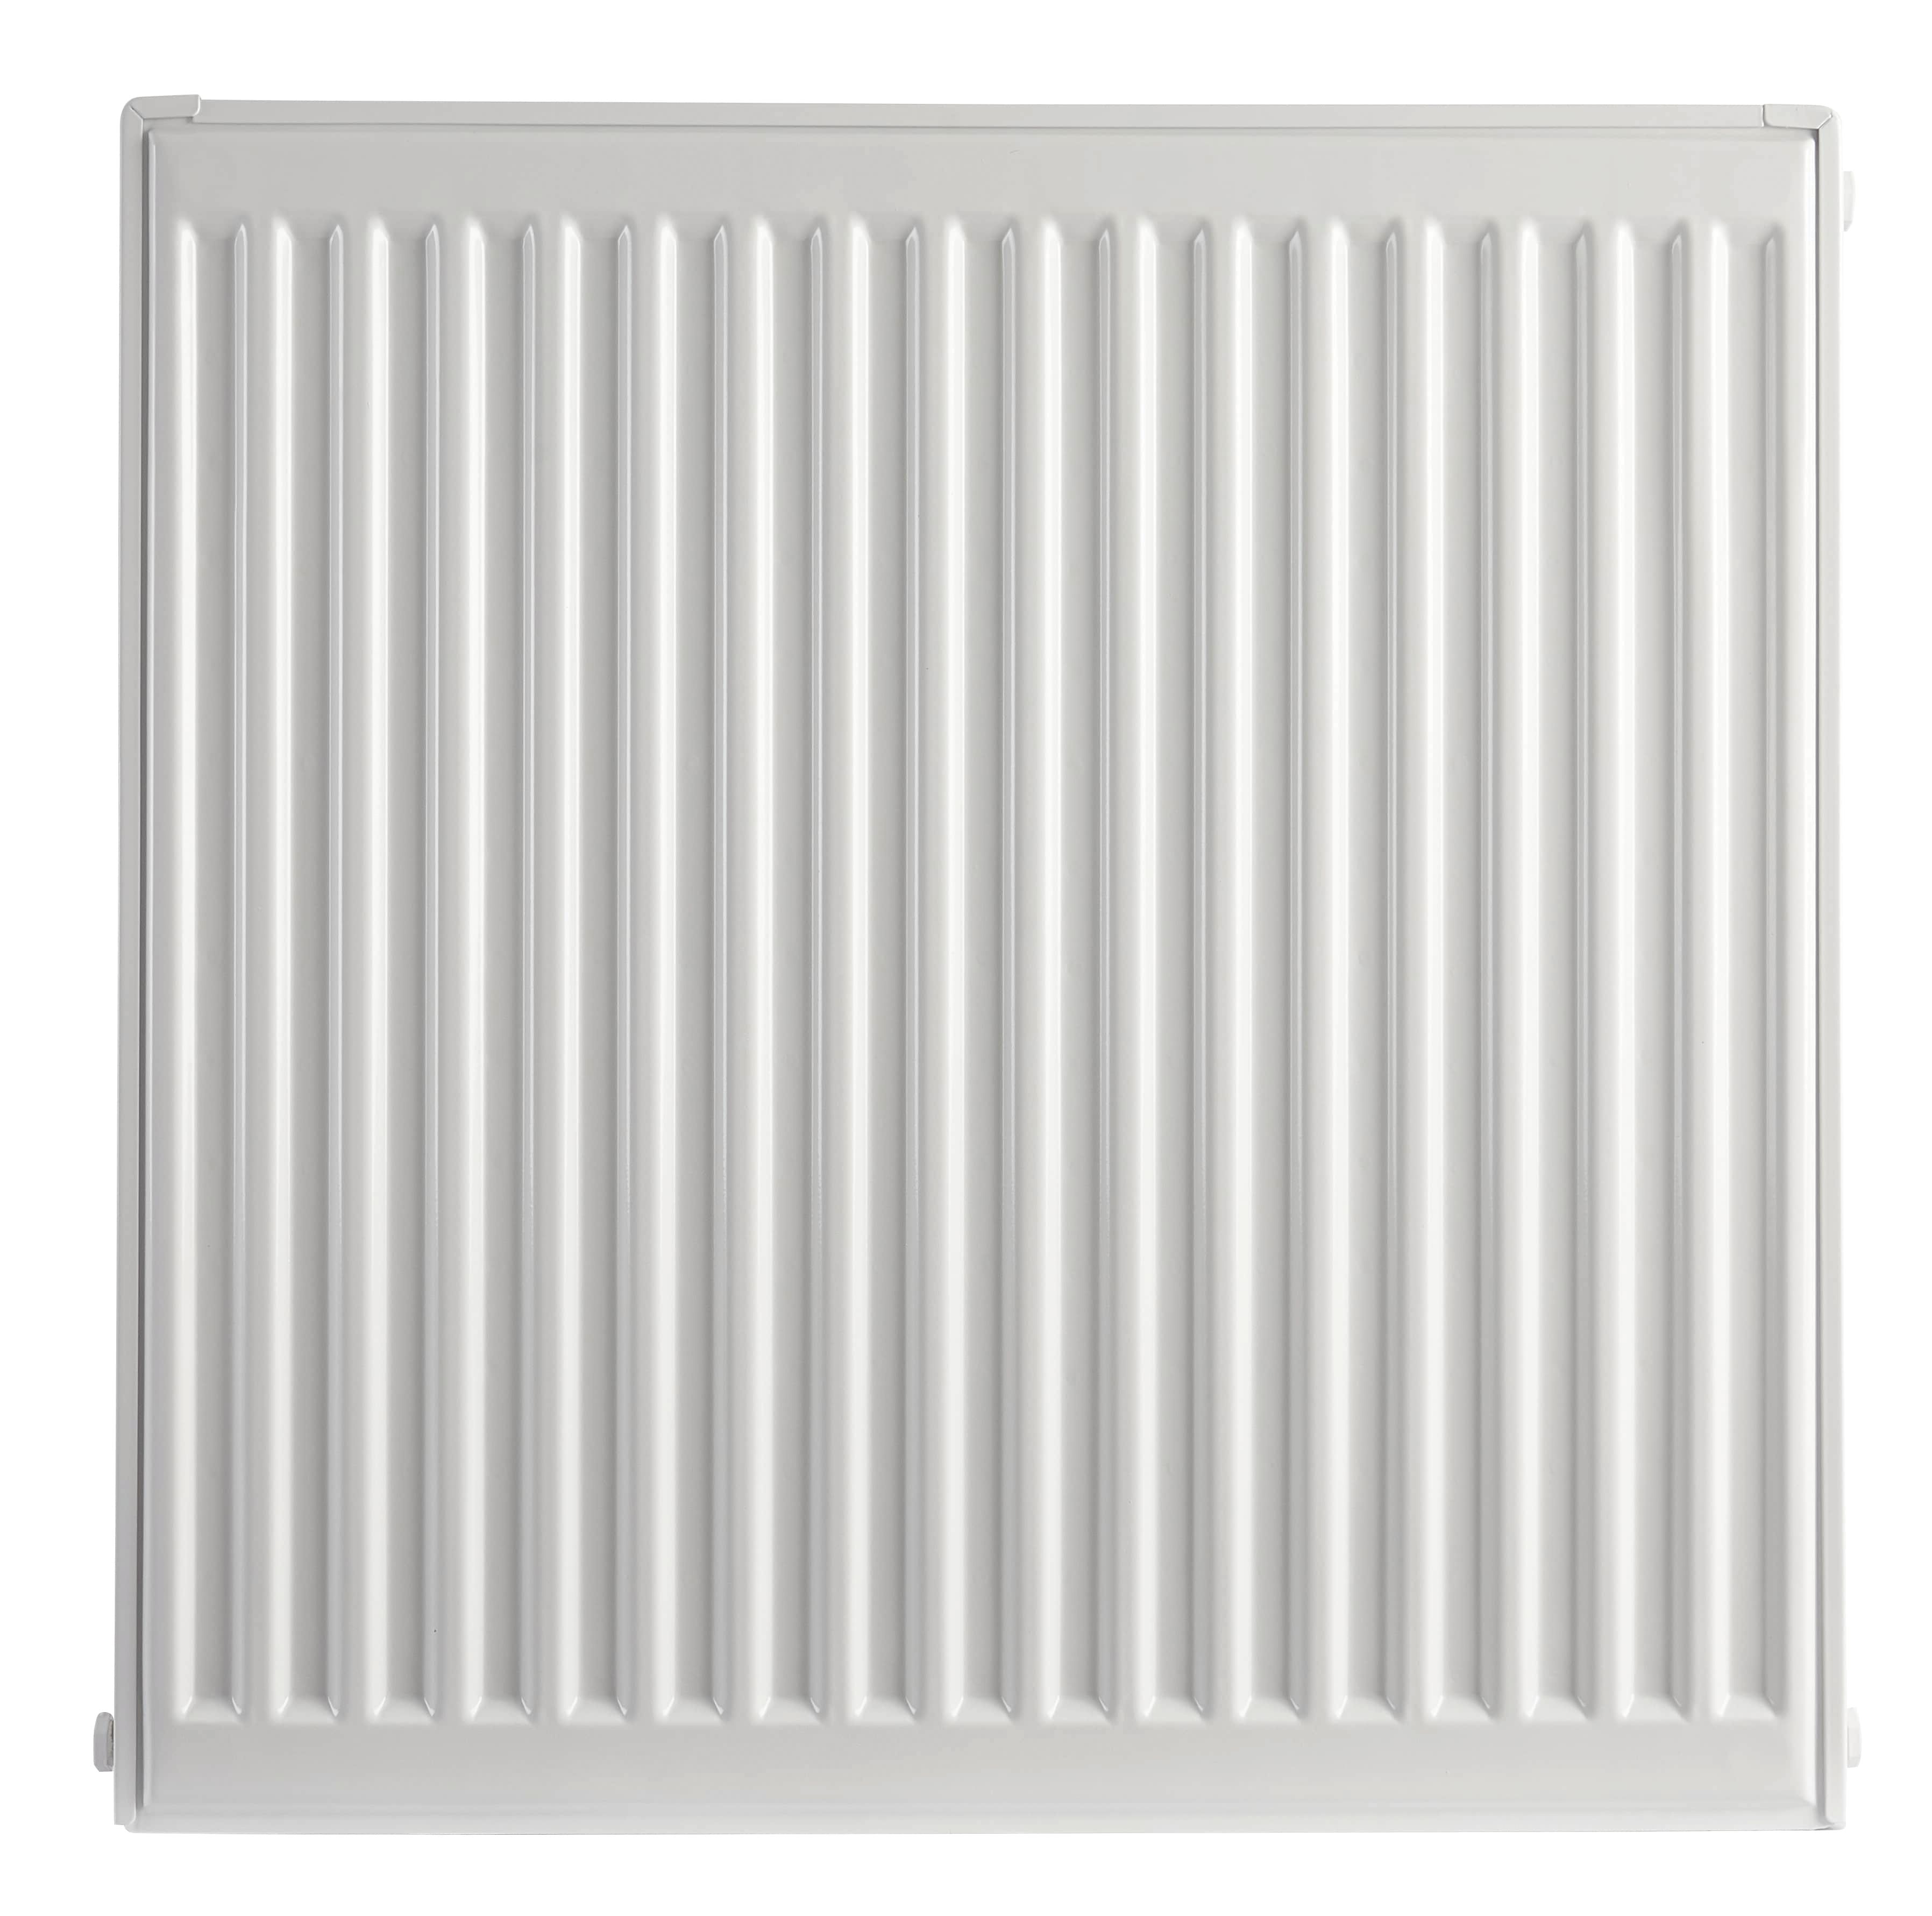 Image of Homeline by Stelrad 600 x 400mm Type 11 Single Panel Single Convector Radiator